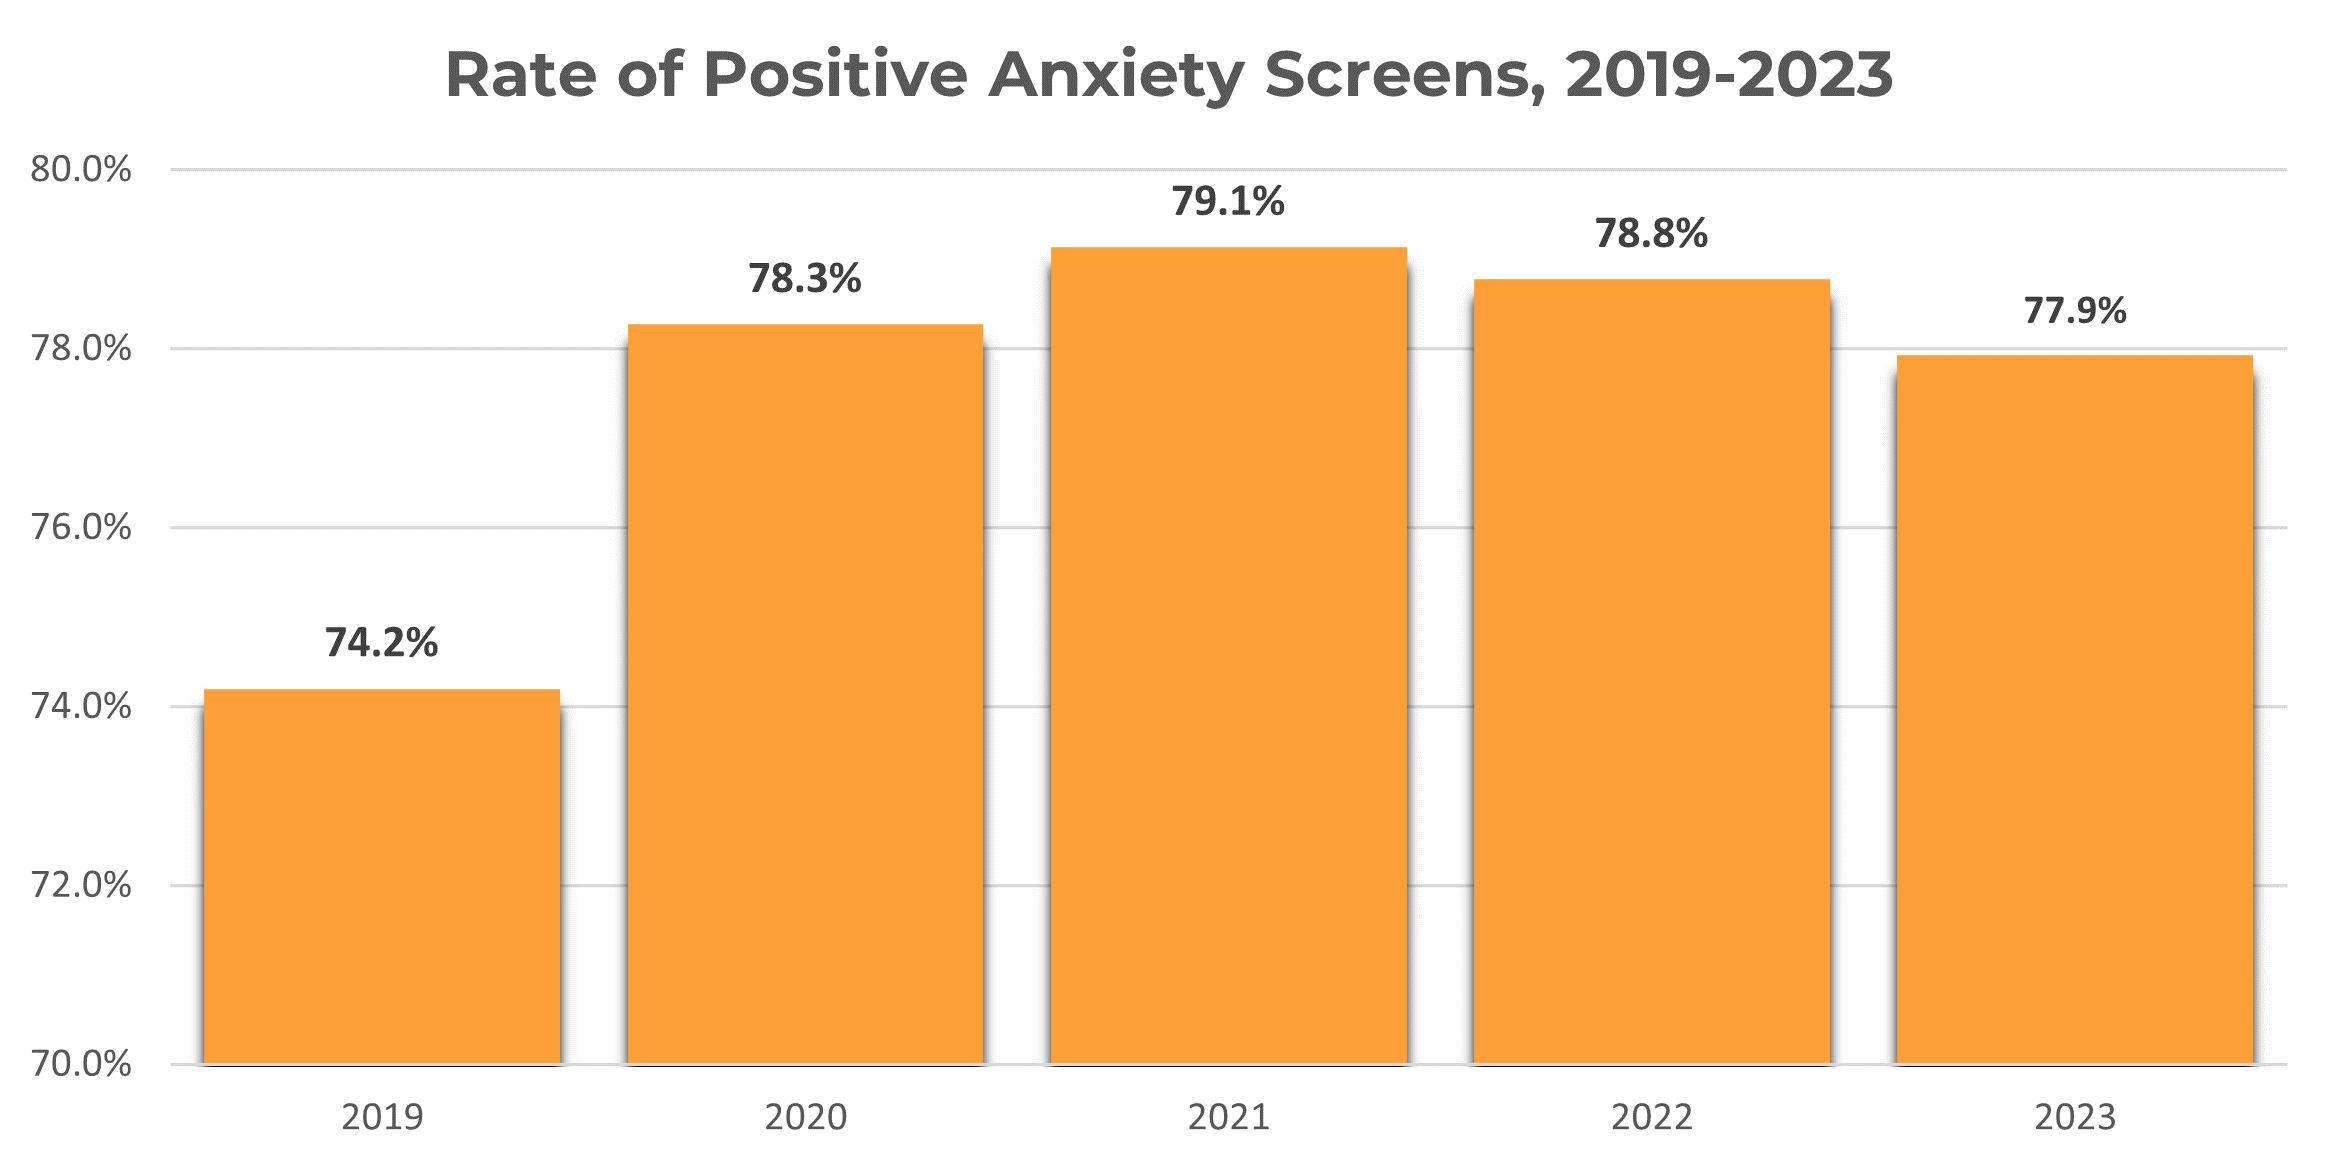 Bar graph comparing the percentage of those scoring positive for anxiety by year from 2019 to 2023